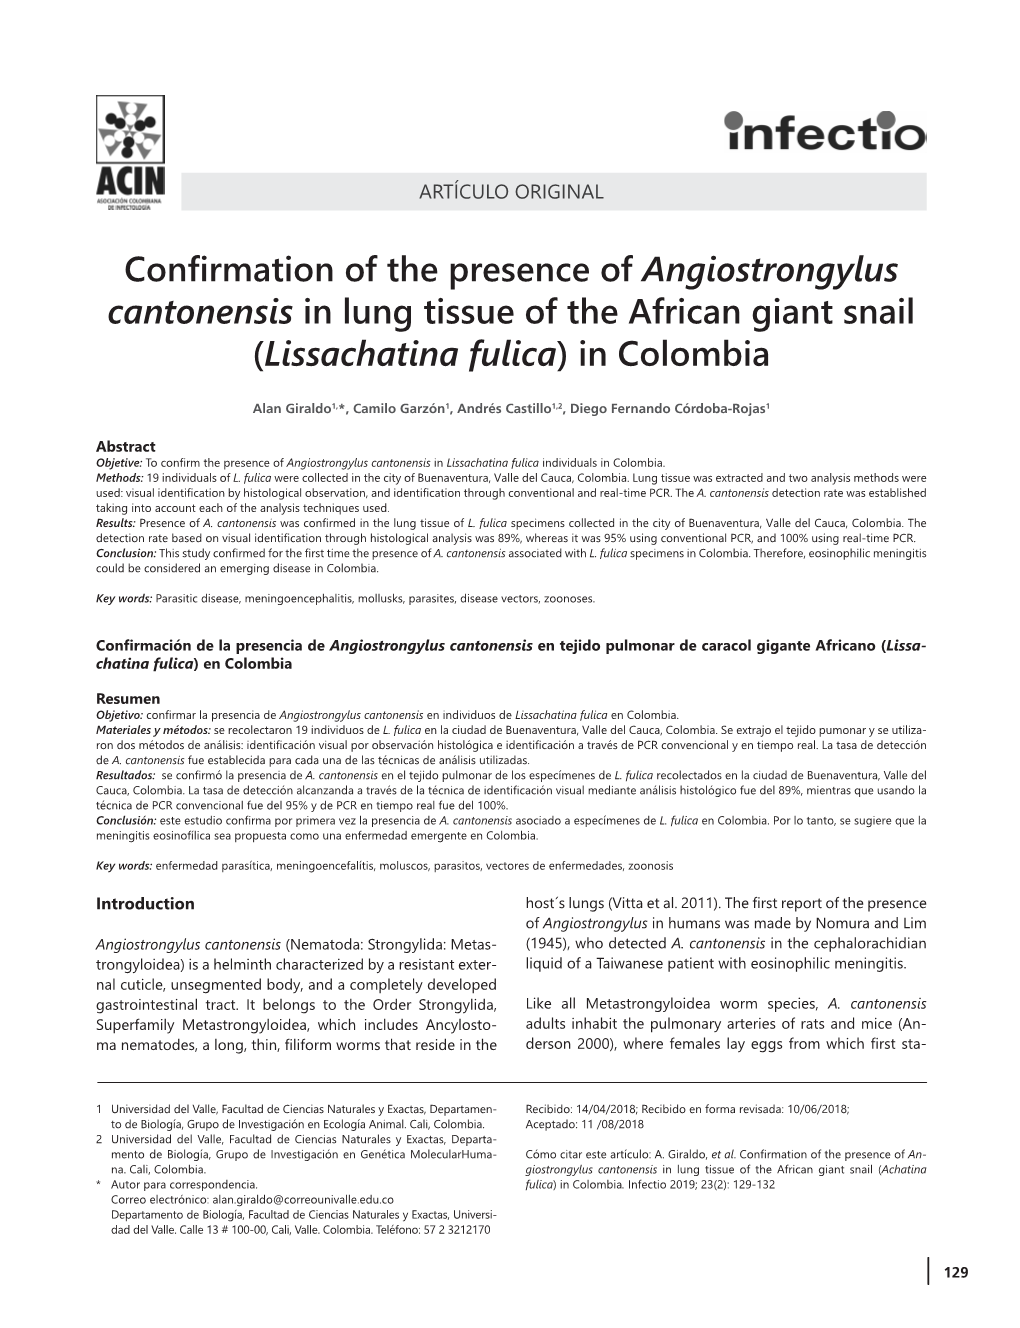 Confirmation of the Presence of Angiostrongylus Cantonensis in Lung Tissue of the African Giant Snail (Lissachatina Fulica) in Colombia